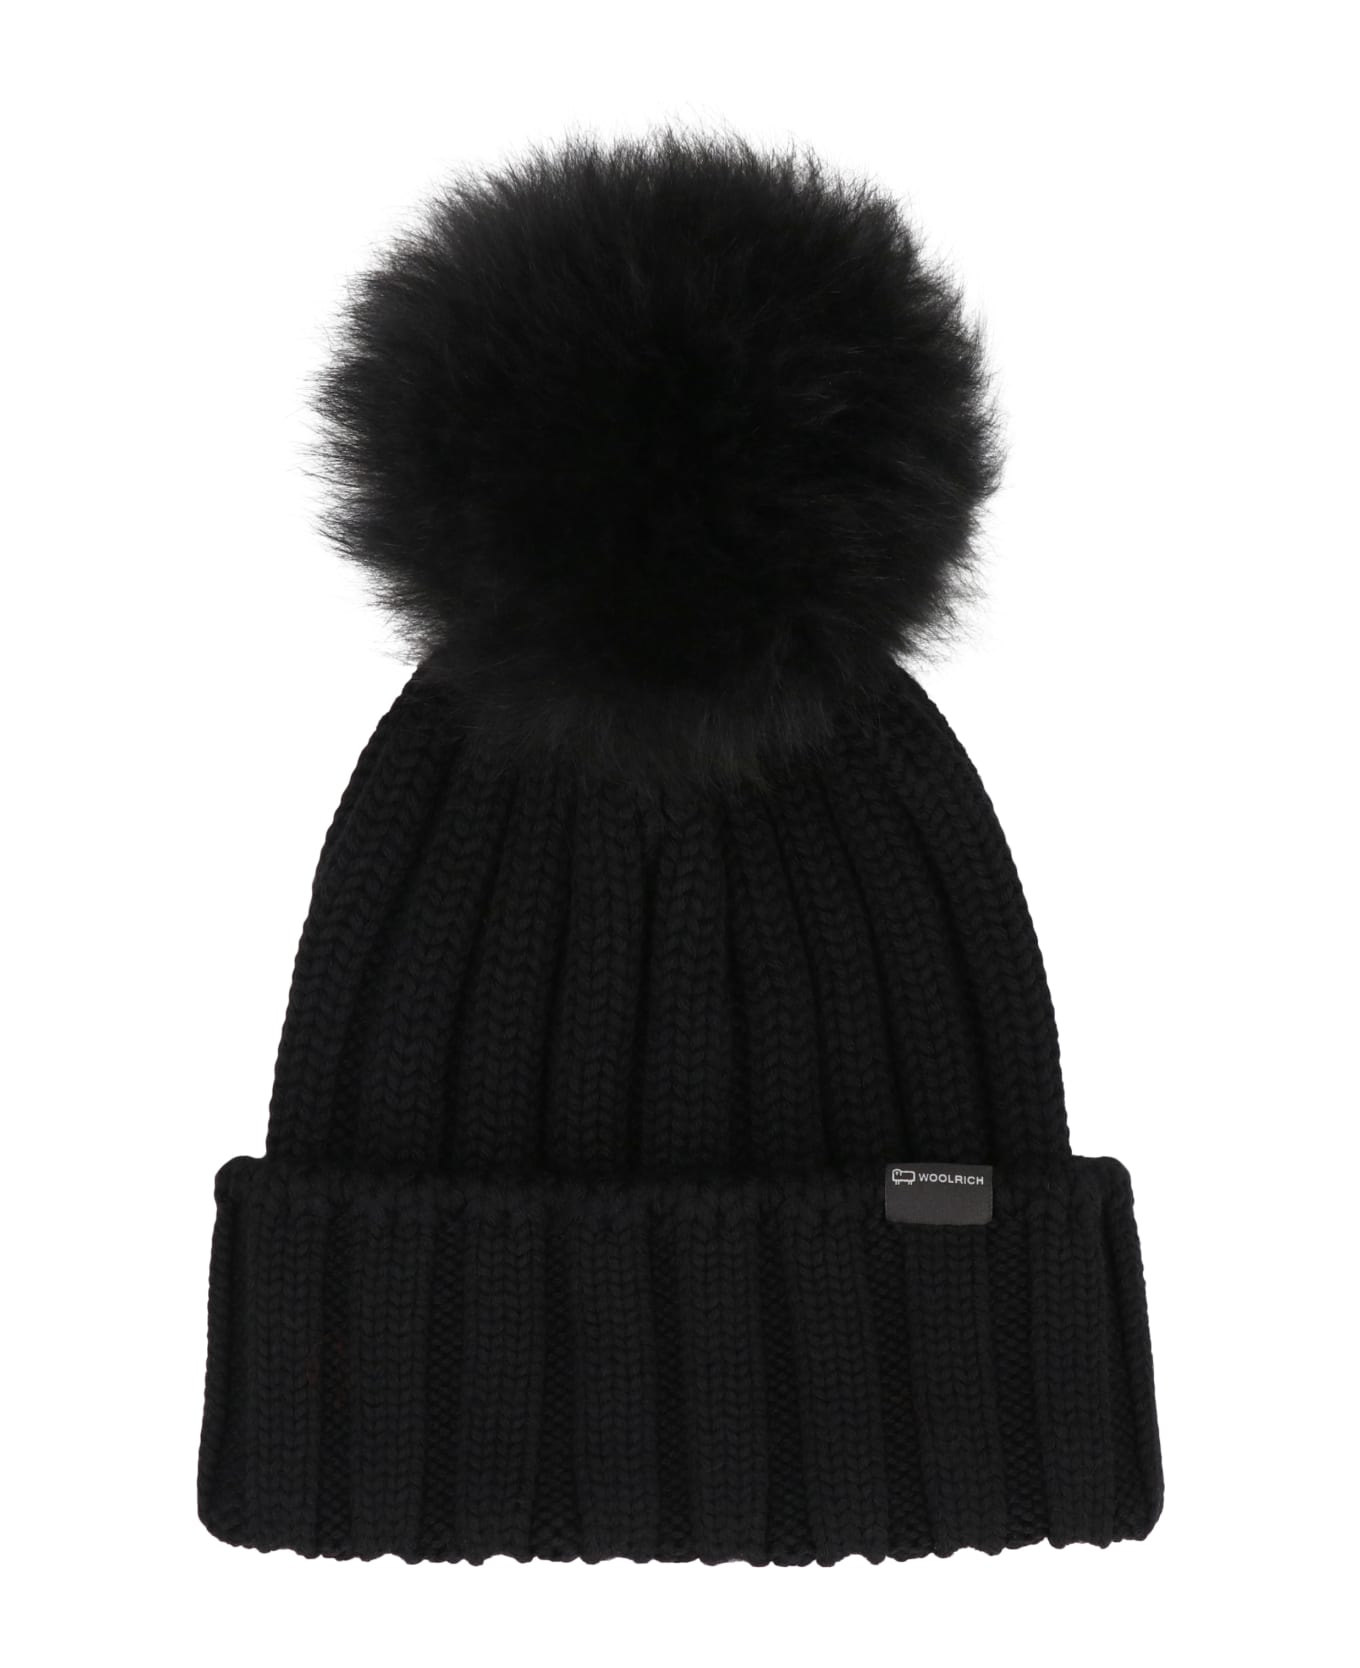 Woolrich Knitted Wool Beanie With Pom-pom 帽子